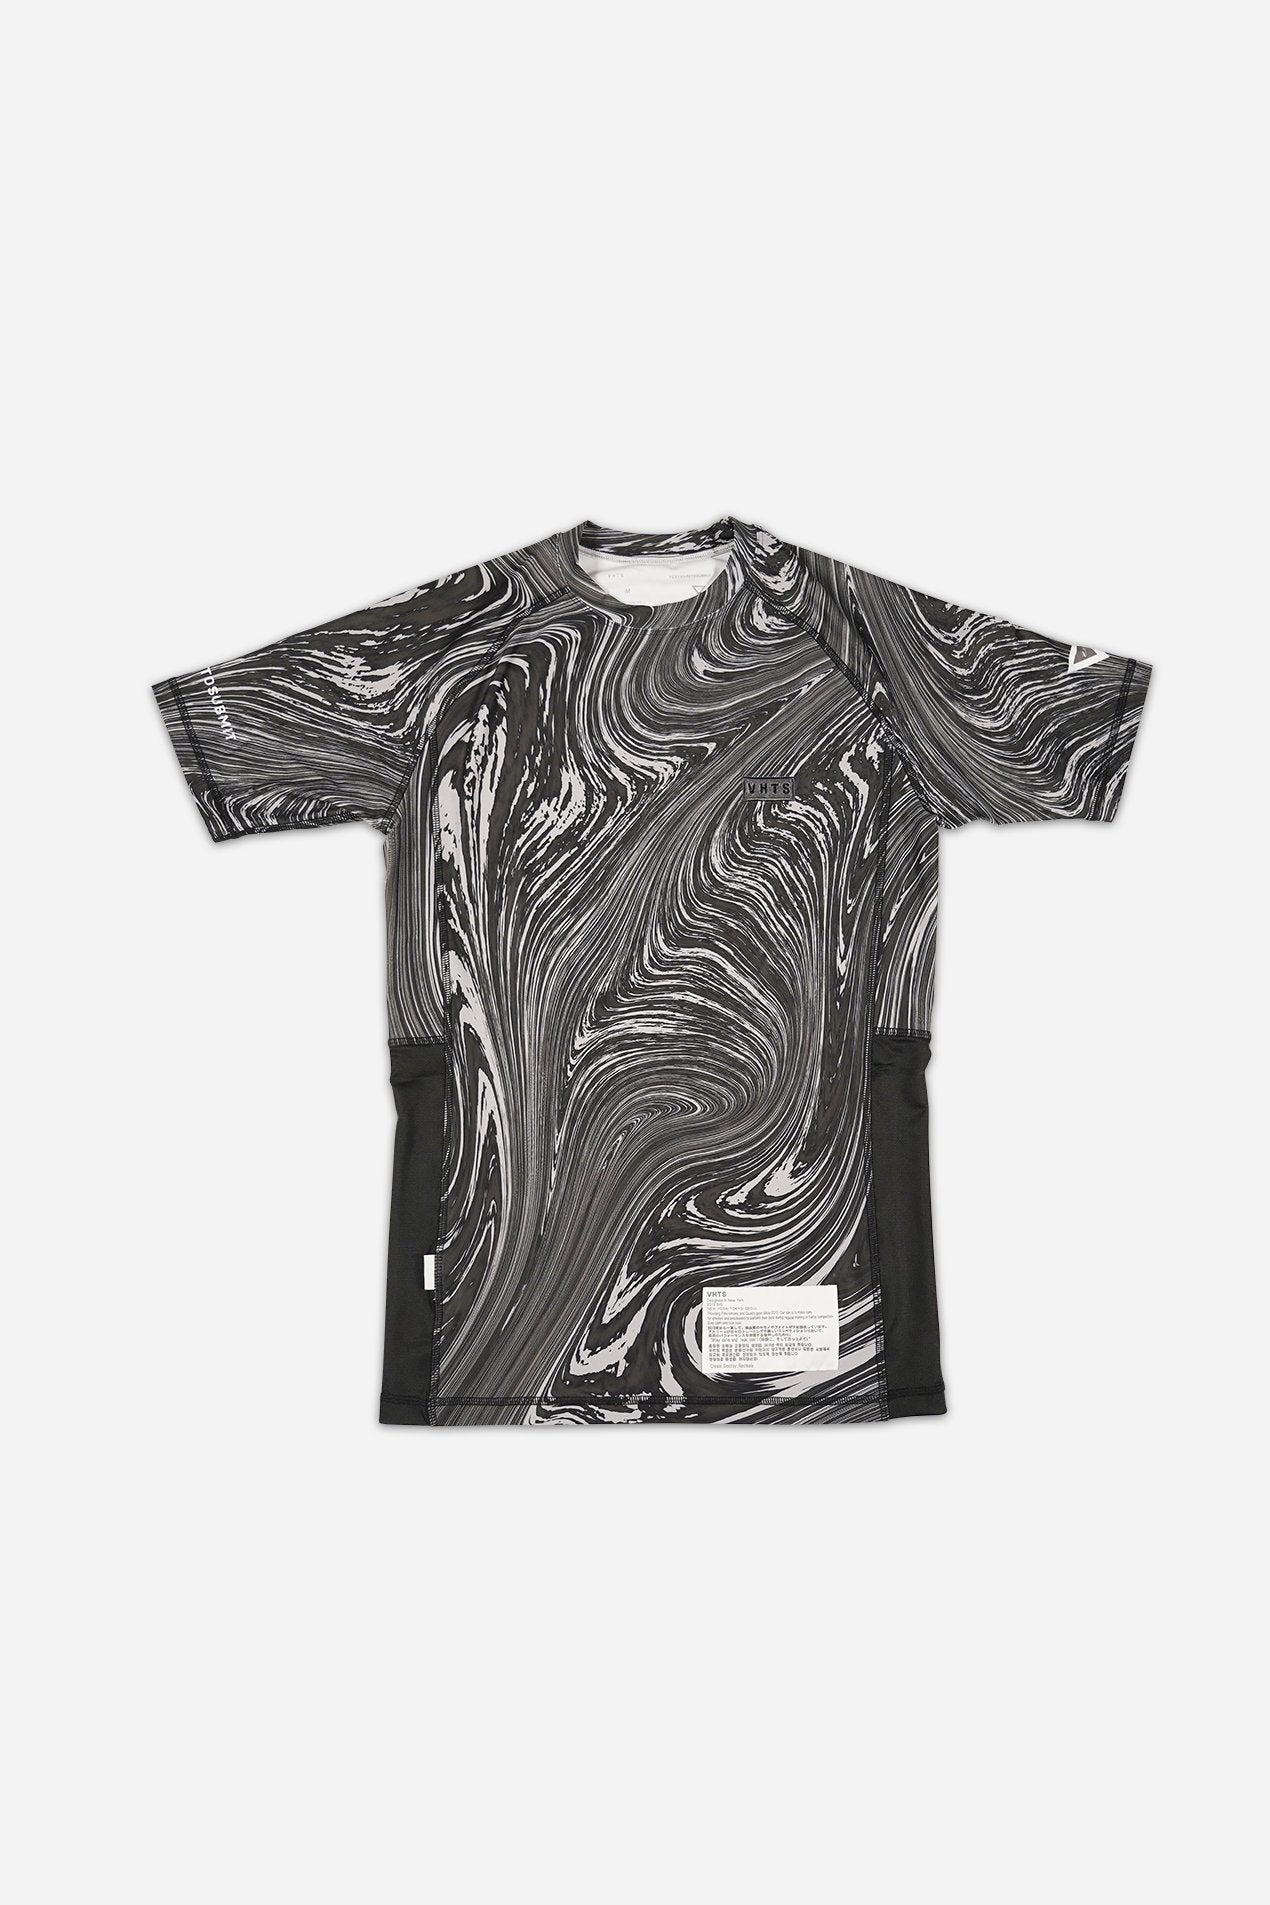 Spring/ Summer 2022 special edition Short sleeves rash guard “Marble” Charcoal